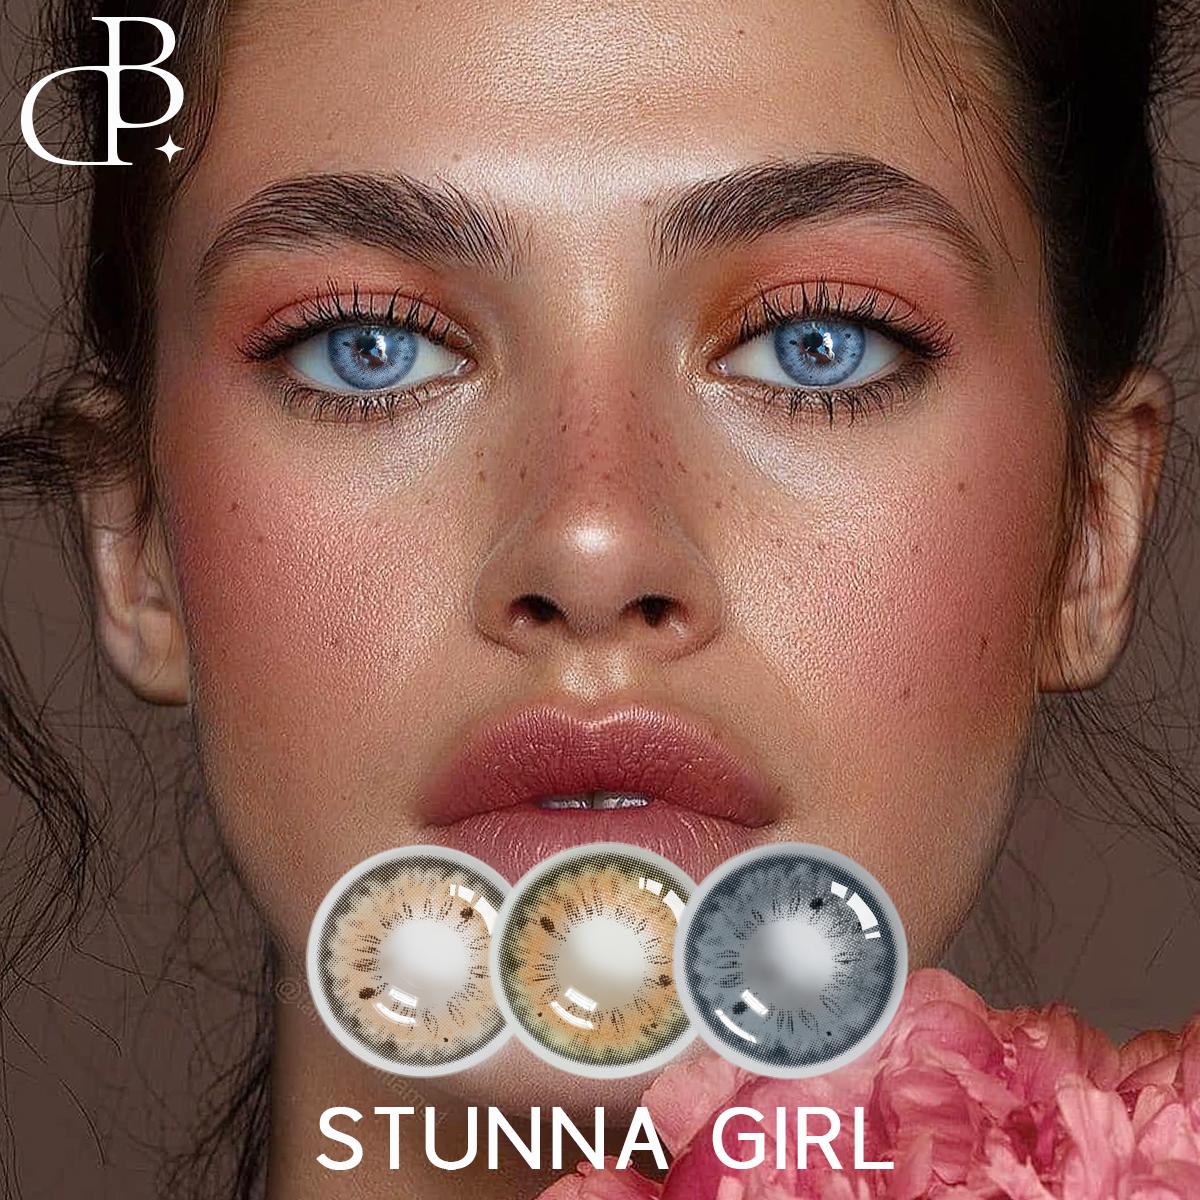 STUNNA GIRL New Private Label Dbeyes Eye Contact Wholesale Lentilles Contact Couleur Color Cosmetic Contact Lenses